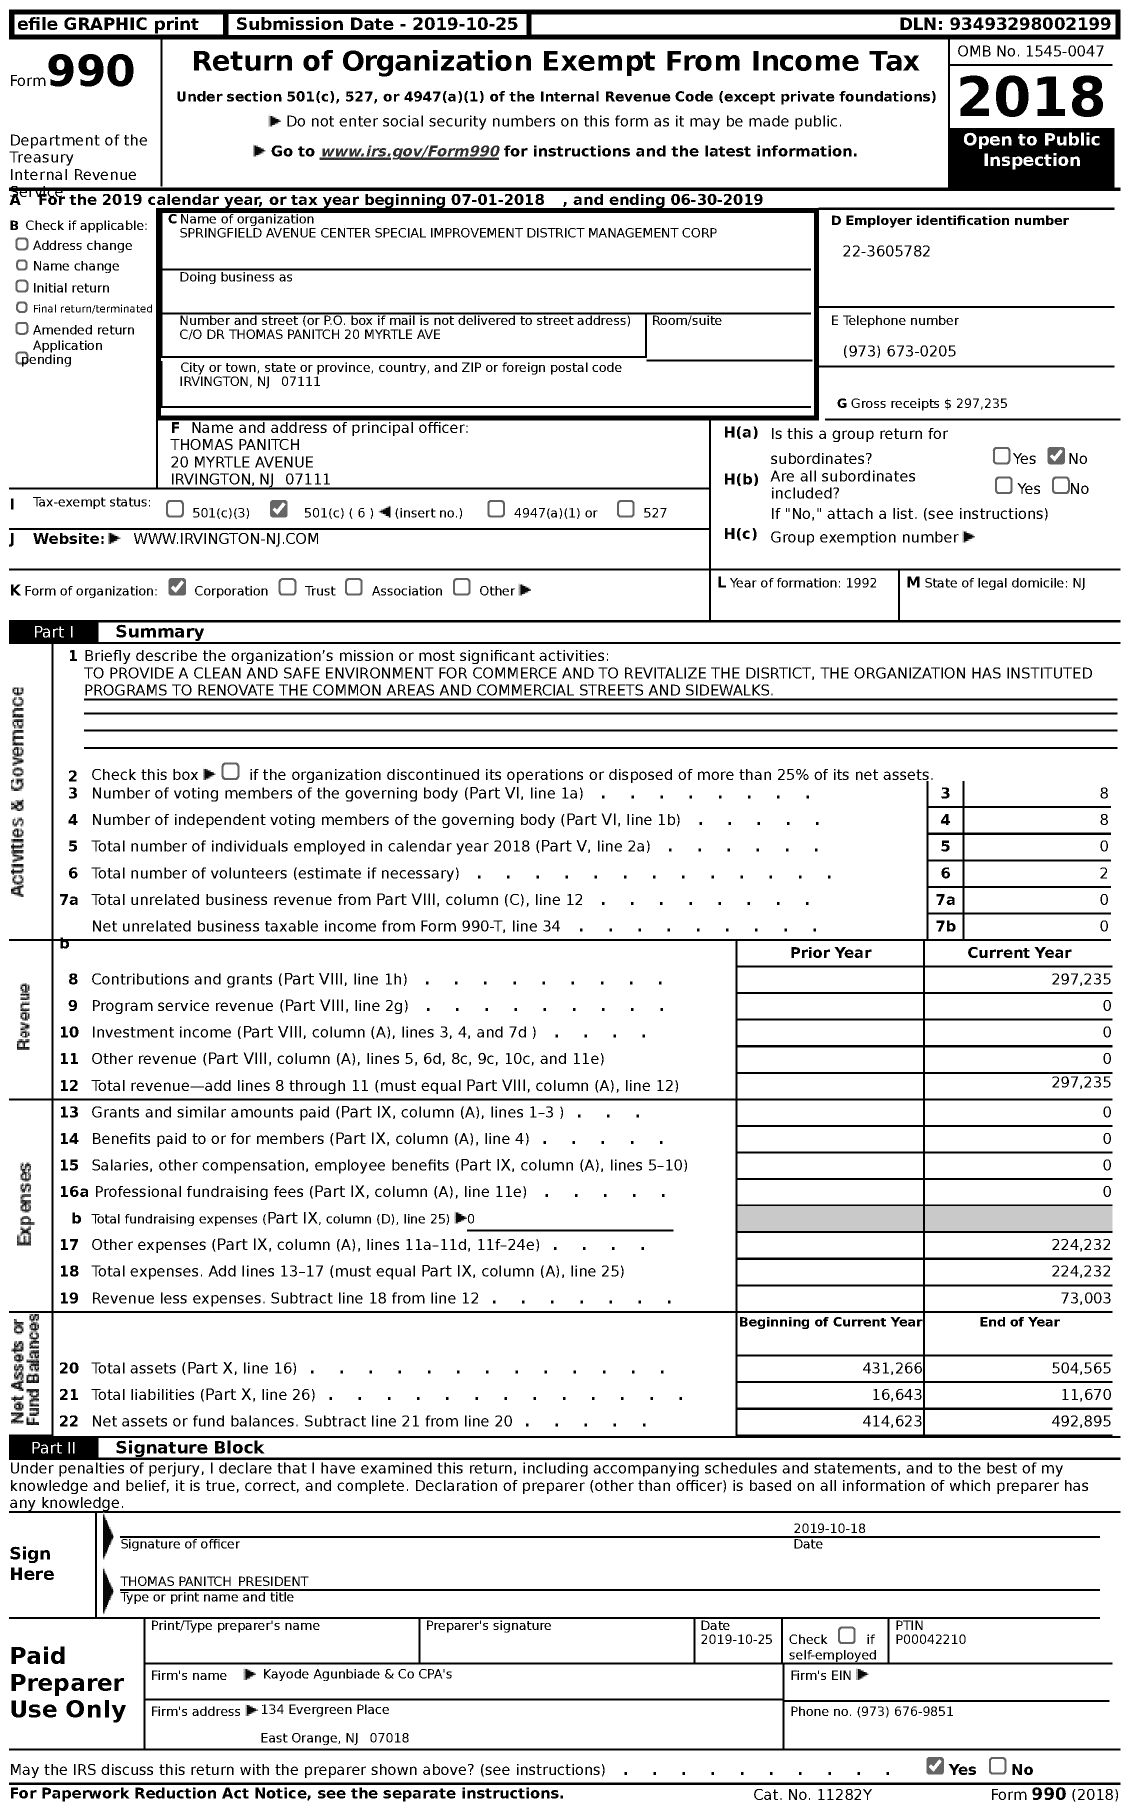 Image of first page of 2018 Form 990 for Springfield Avenue Center Special Improvement District Management Corporation